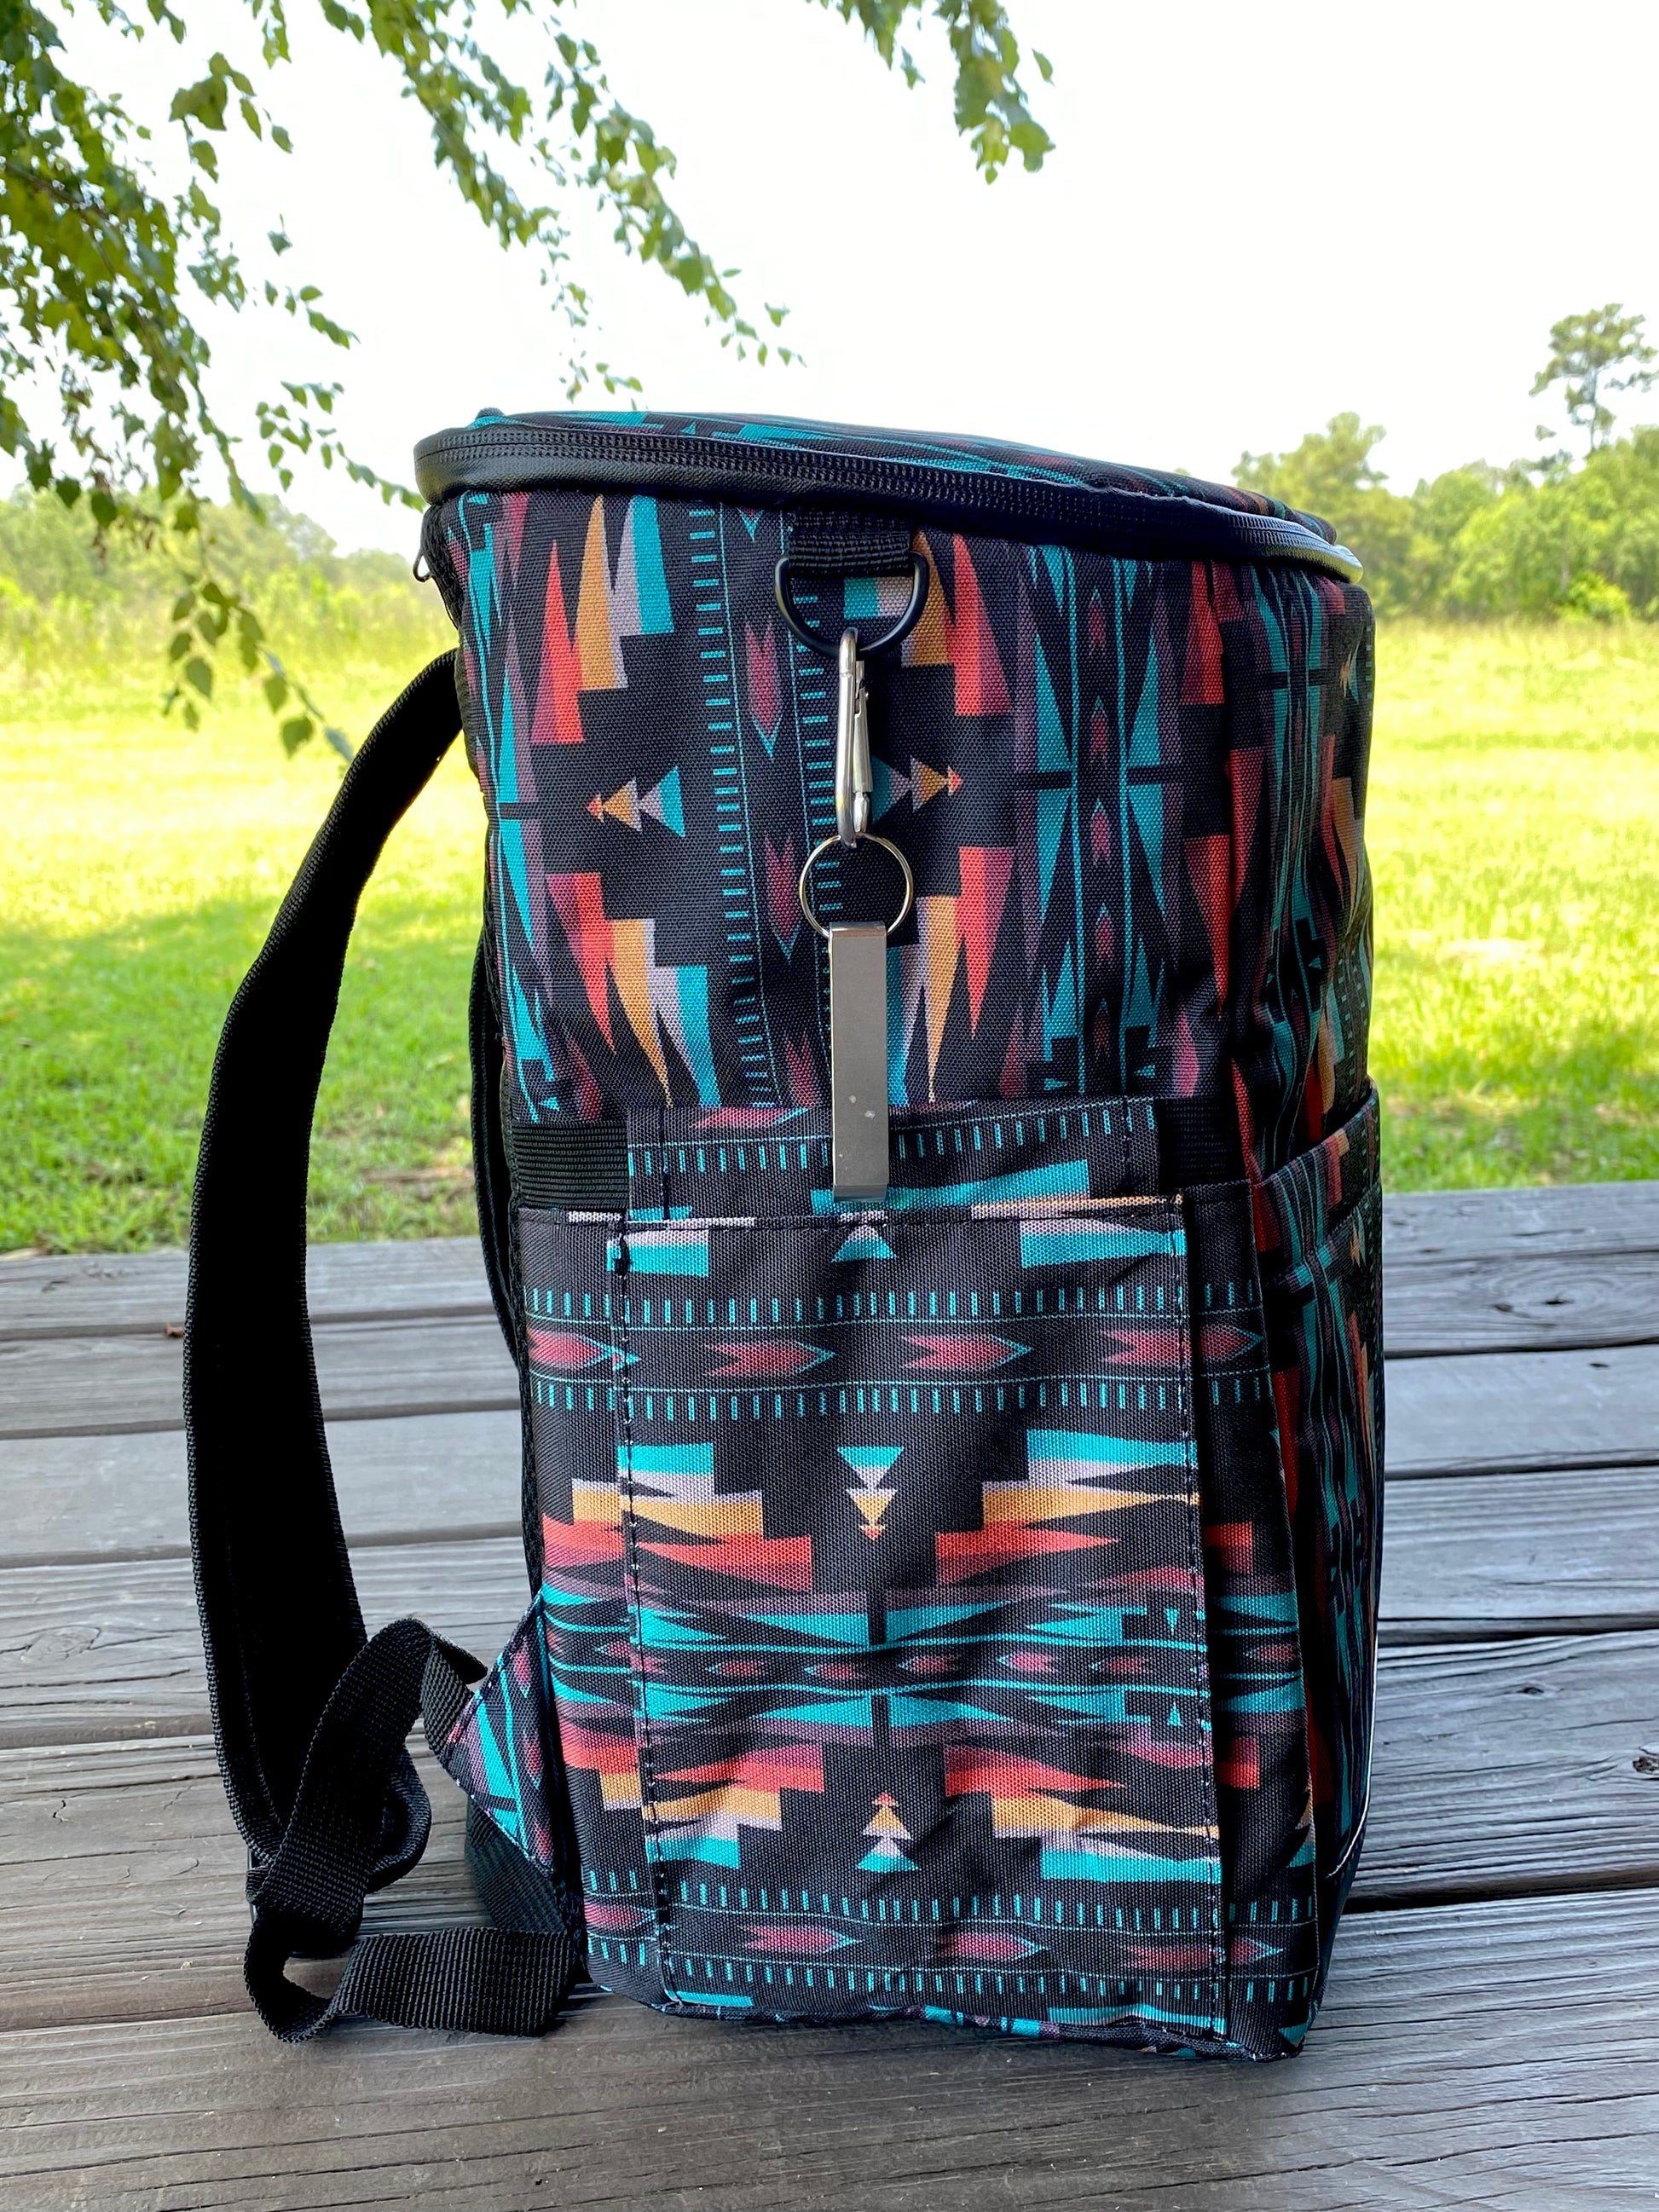 PIKES PEAK AZTEC COOLER BACKPACK - CountryFide Custom Accessories and Outdoors